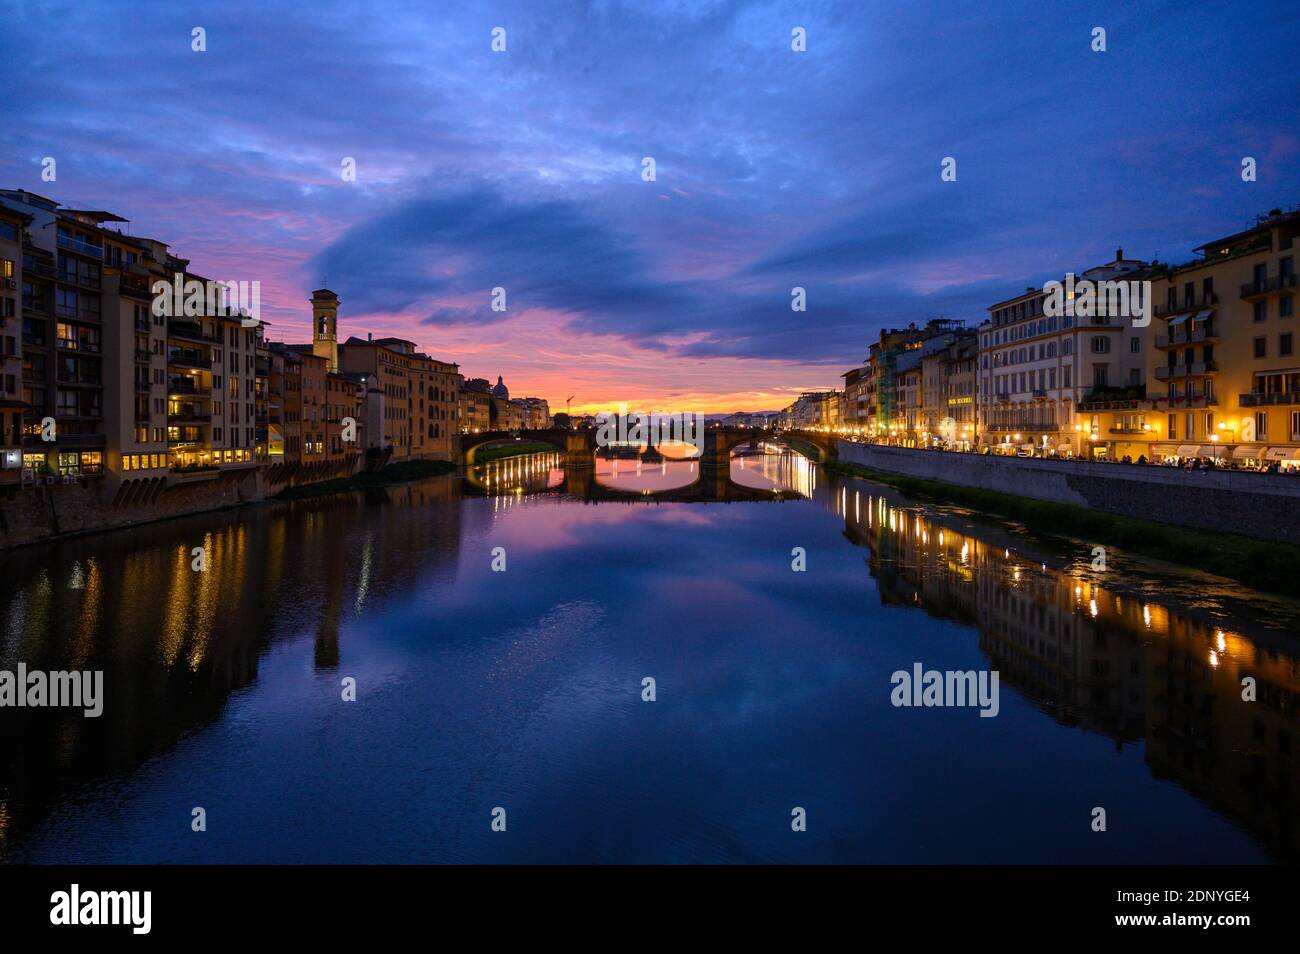 Illuminated Buildings By River Against Sky At Sunset Stock Photo